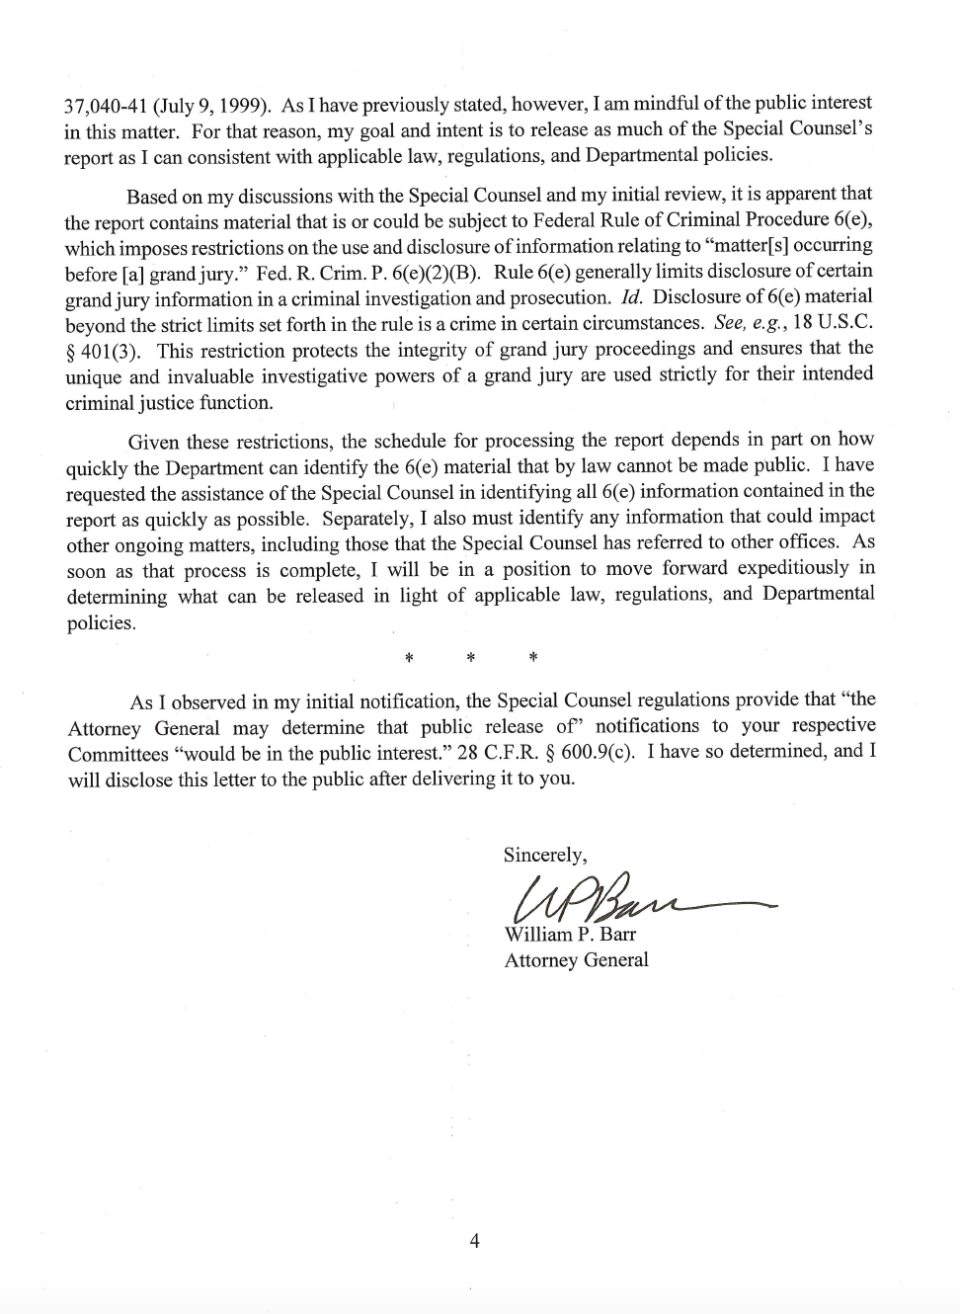 Page 4 of Attorney General William Barr's letter to Congress on Special Counsel Robert Mueller's report.